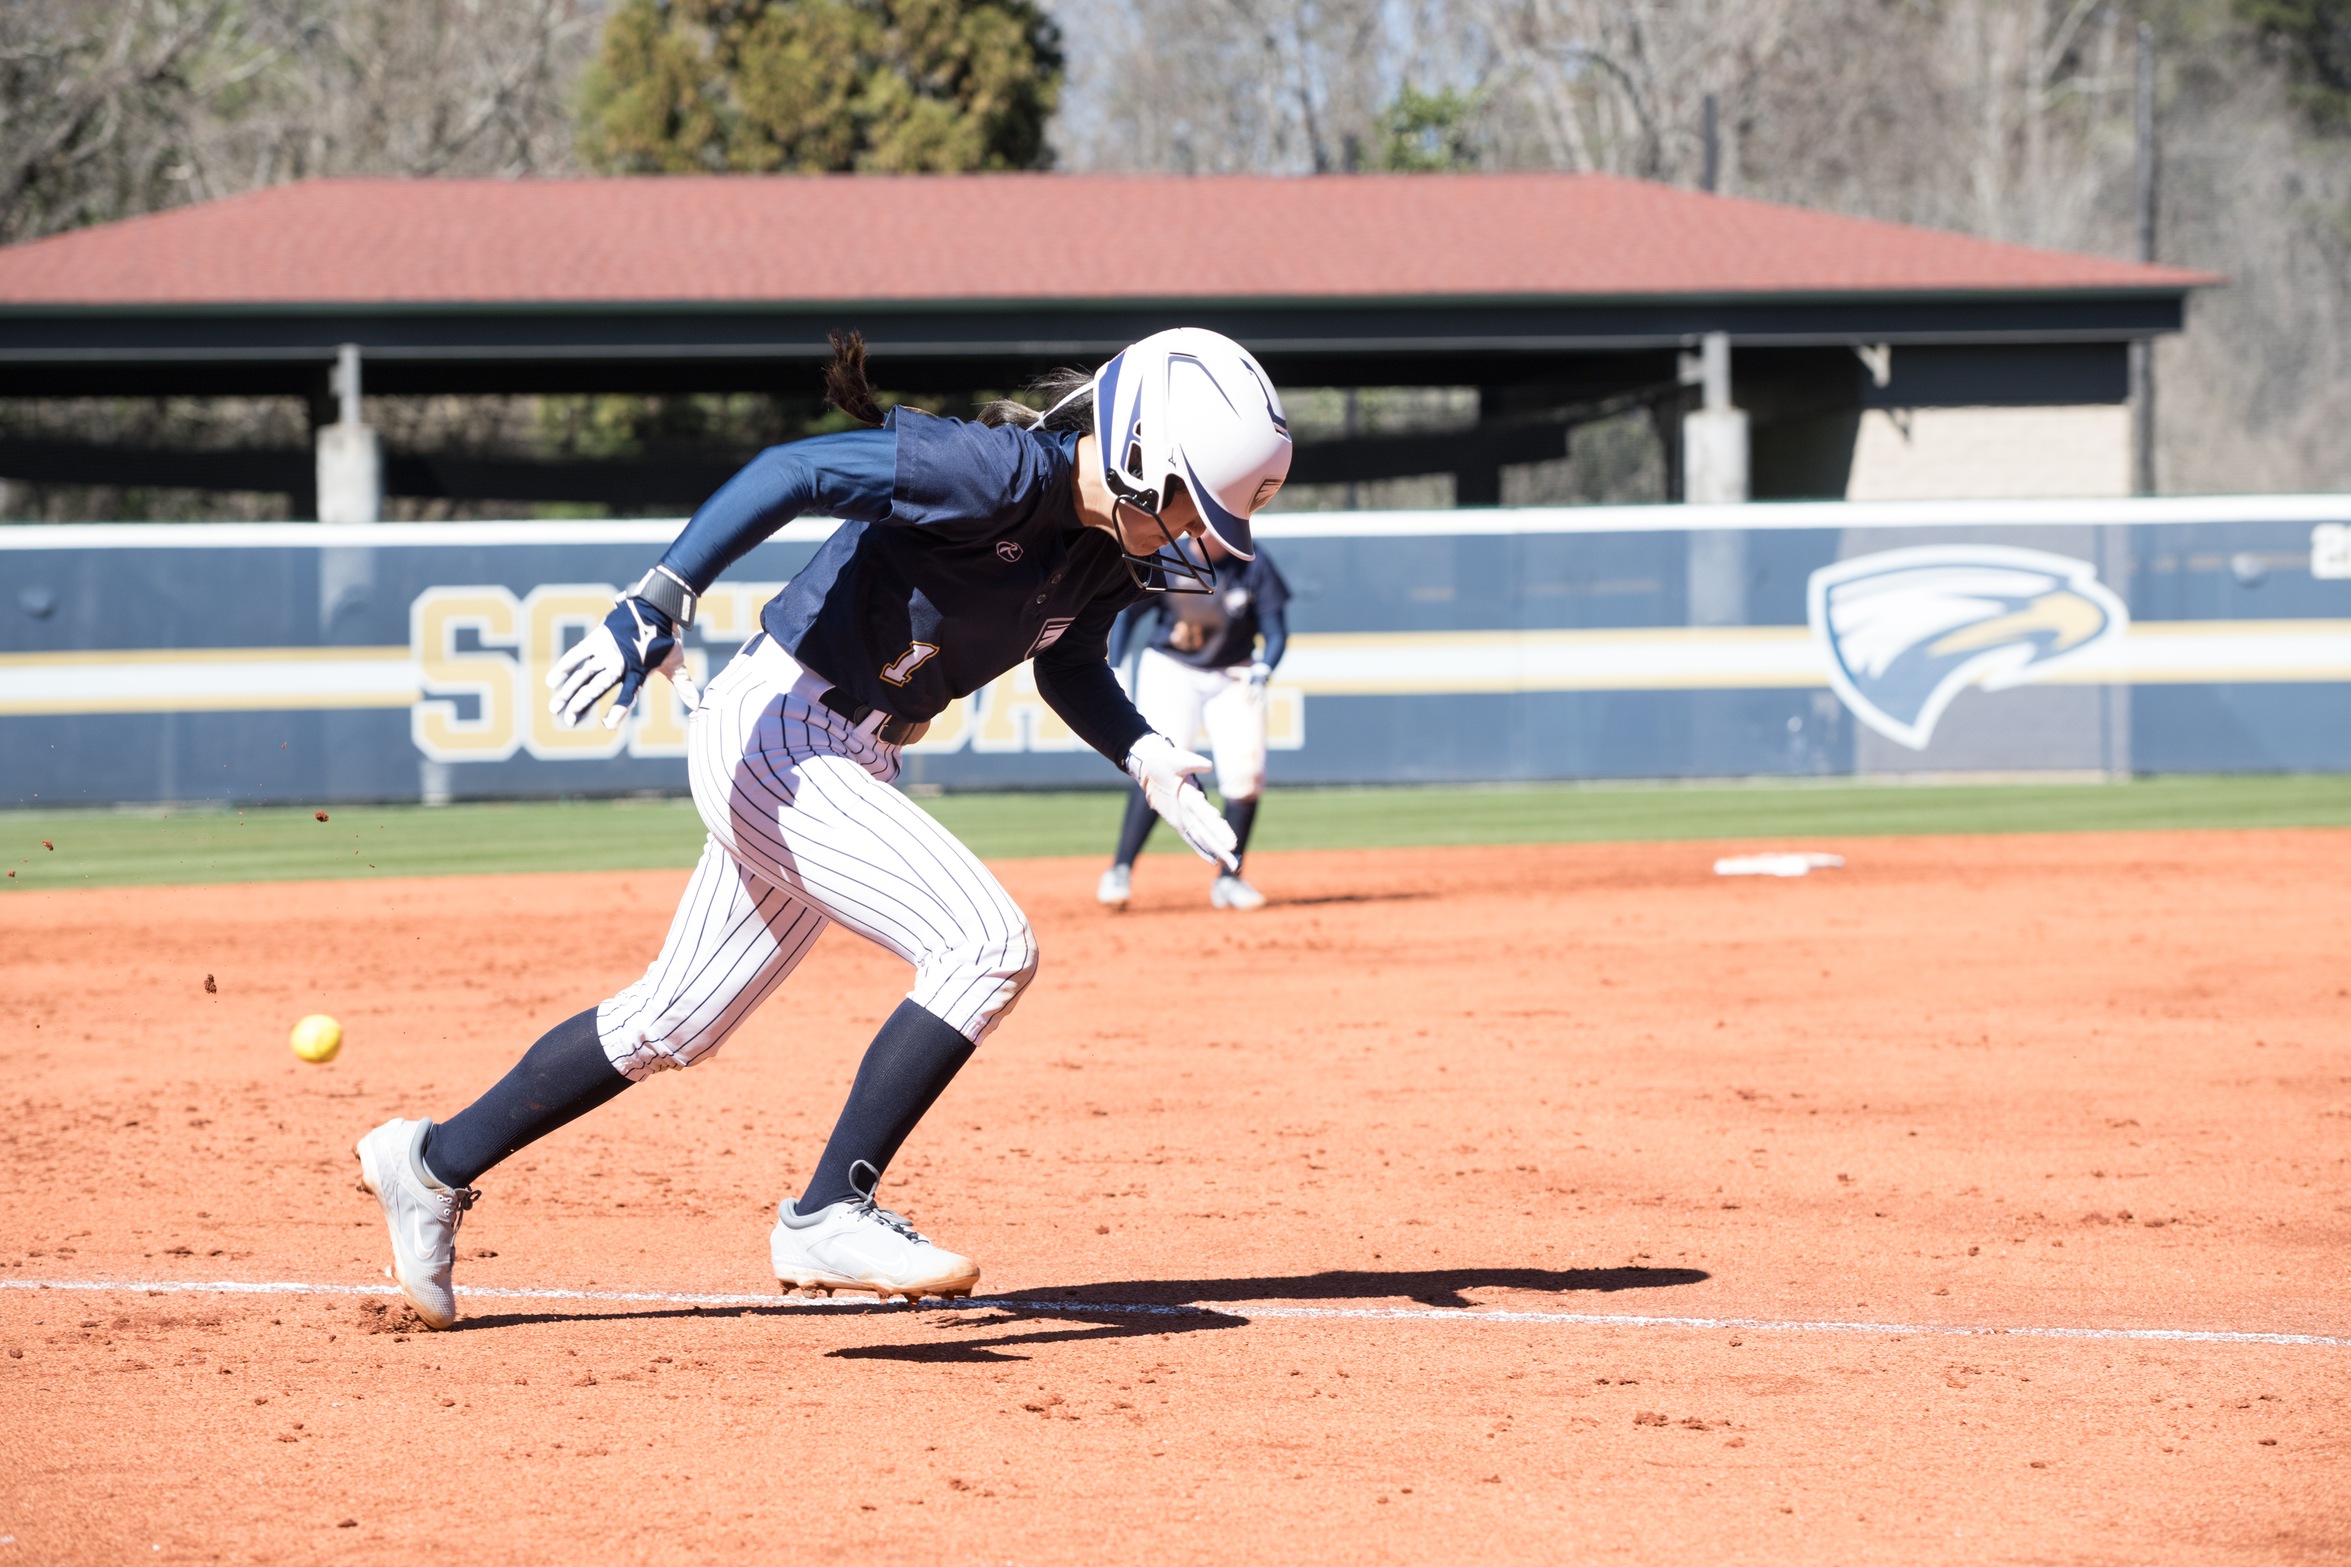 Softball Takes Second Loss Against Maryville, 5-3